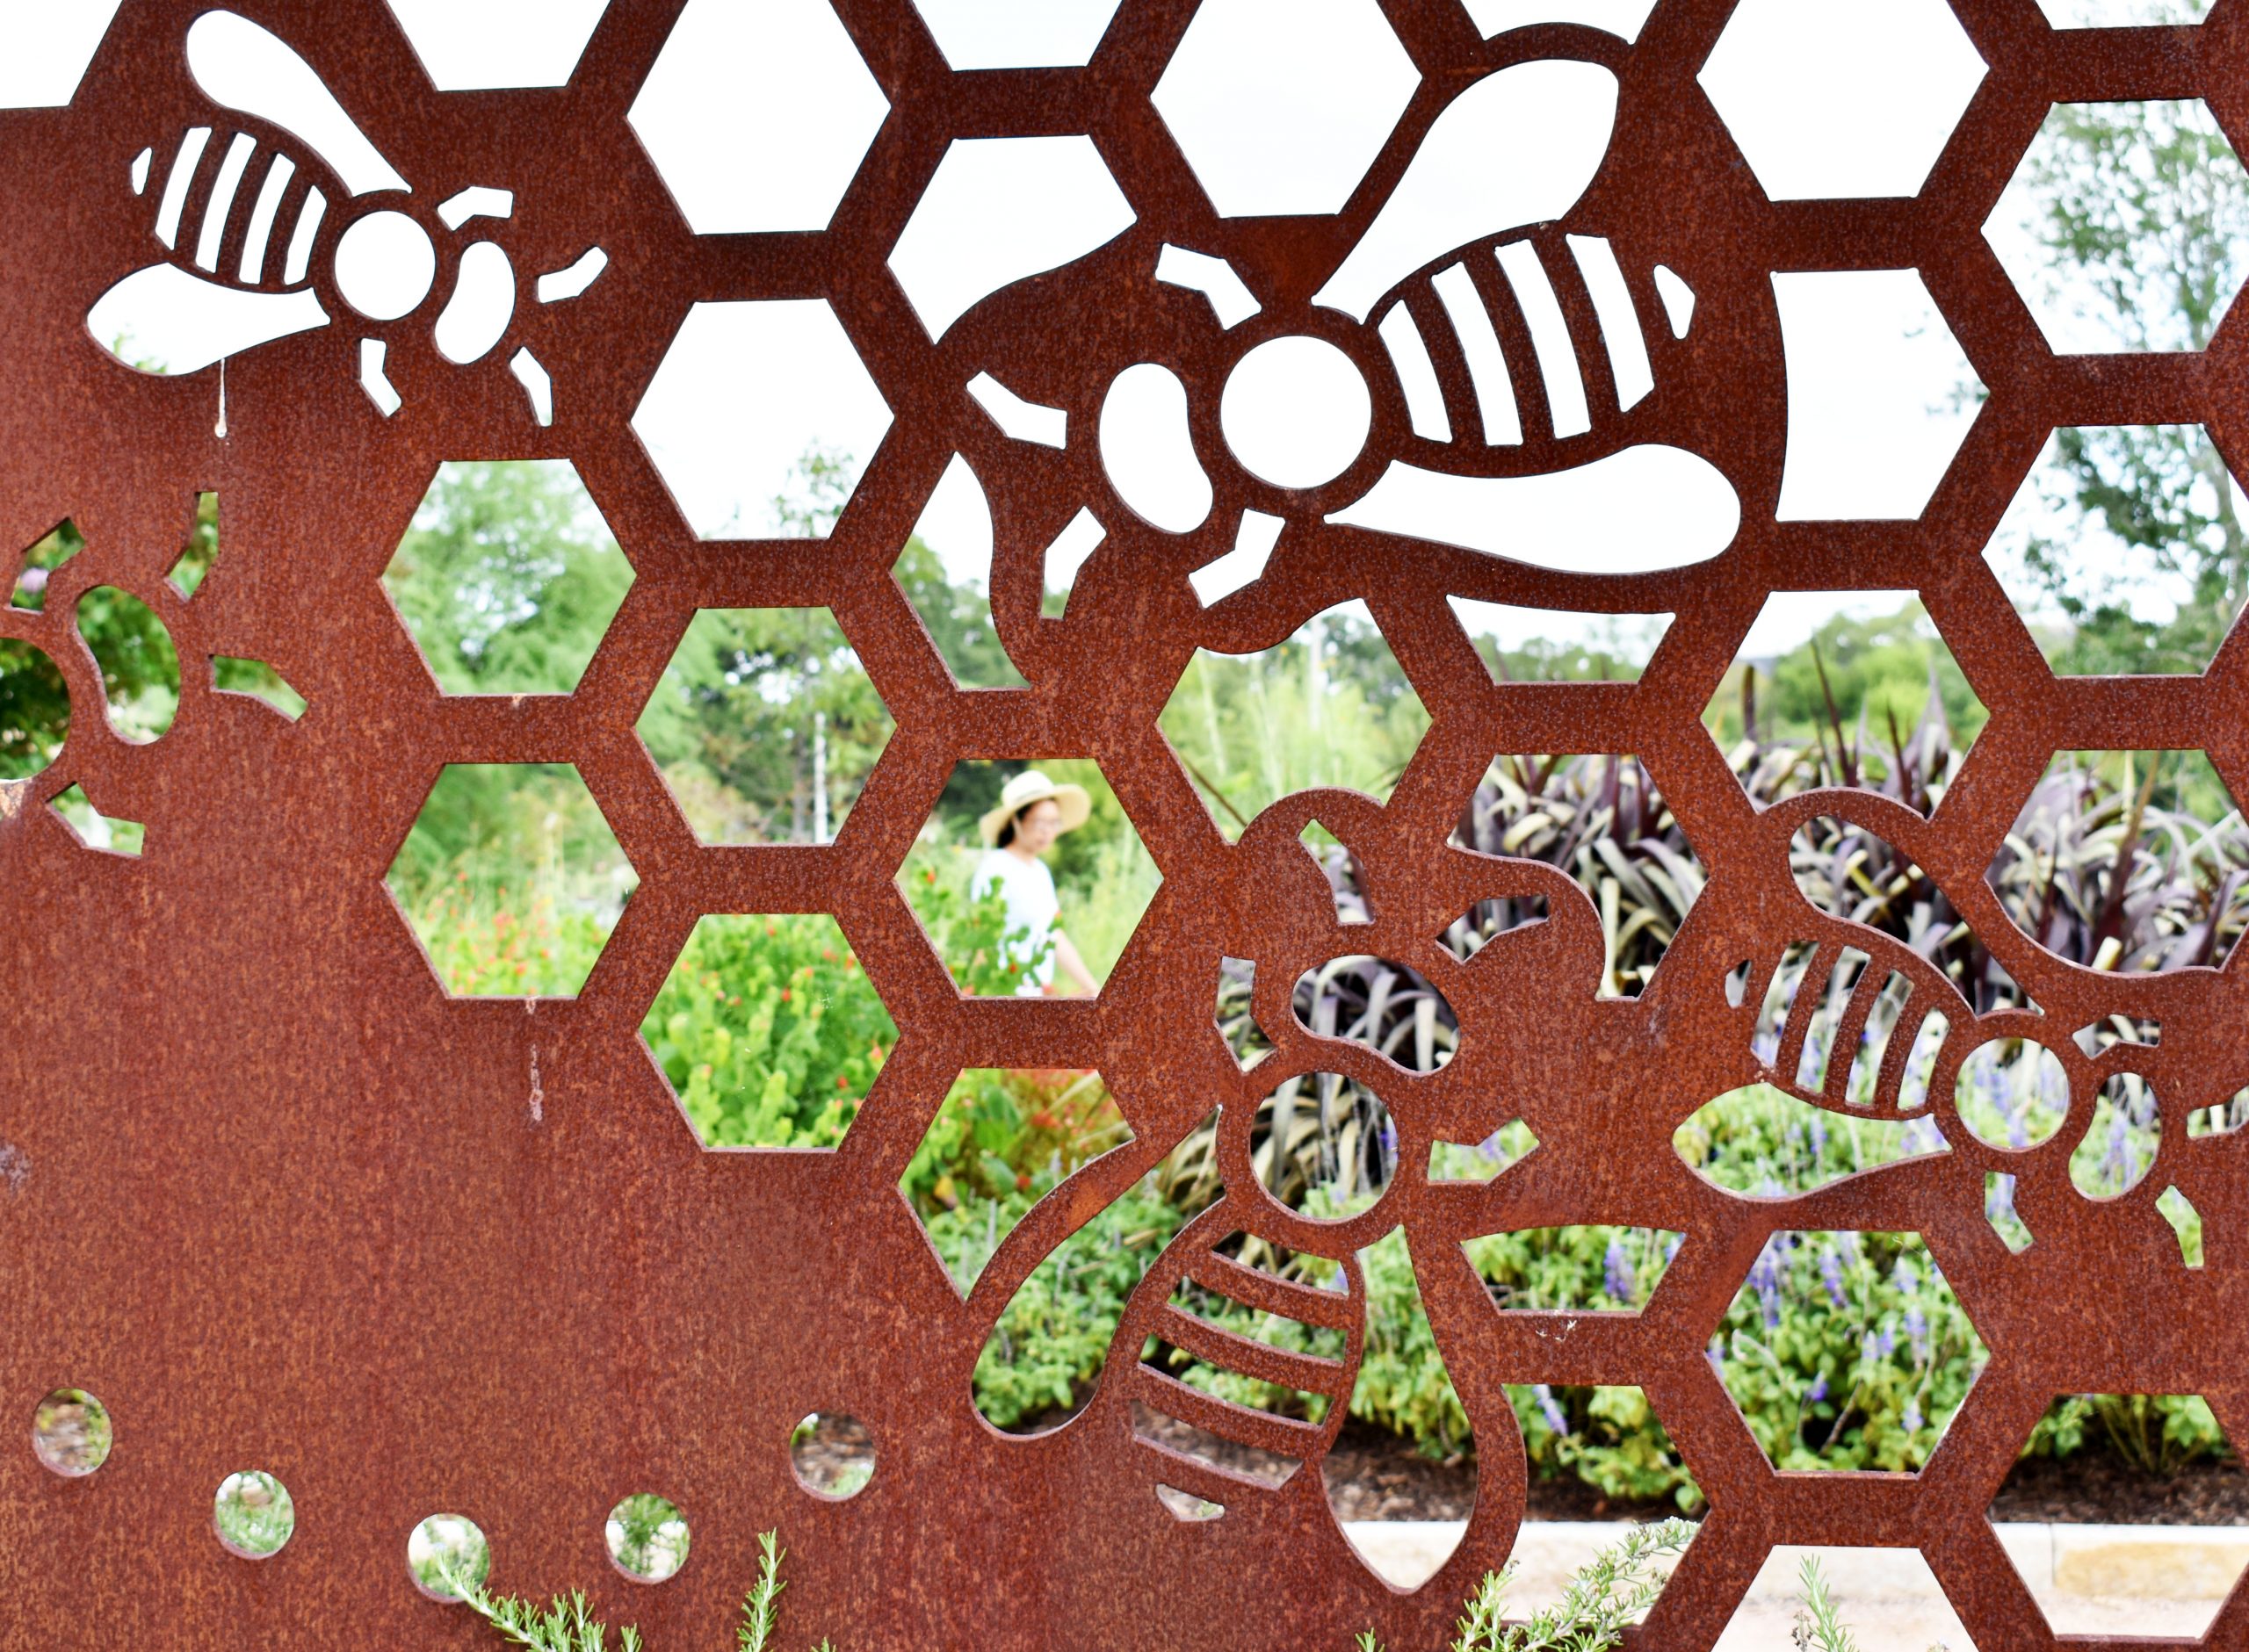 Through metal artwork laser cut to look like an active bee hive, you see a lady in a broad brimmed hat taking a leisurely stroll through The Gardens.